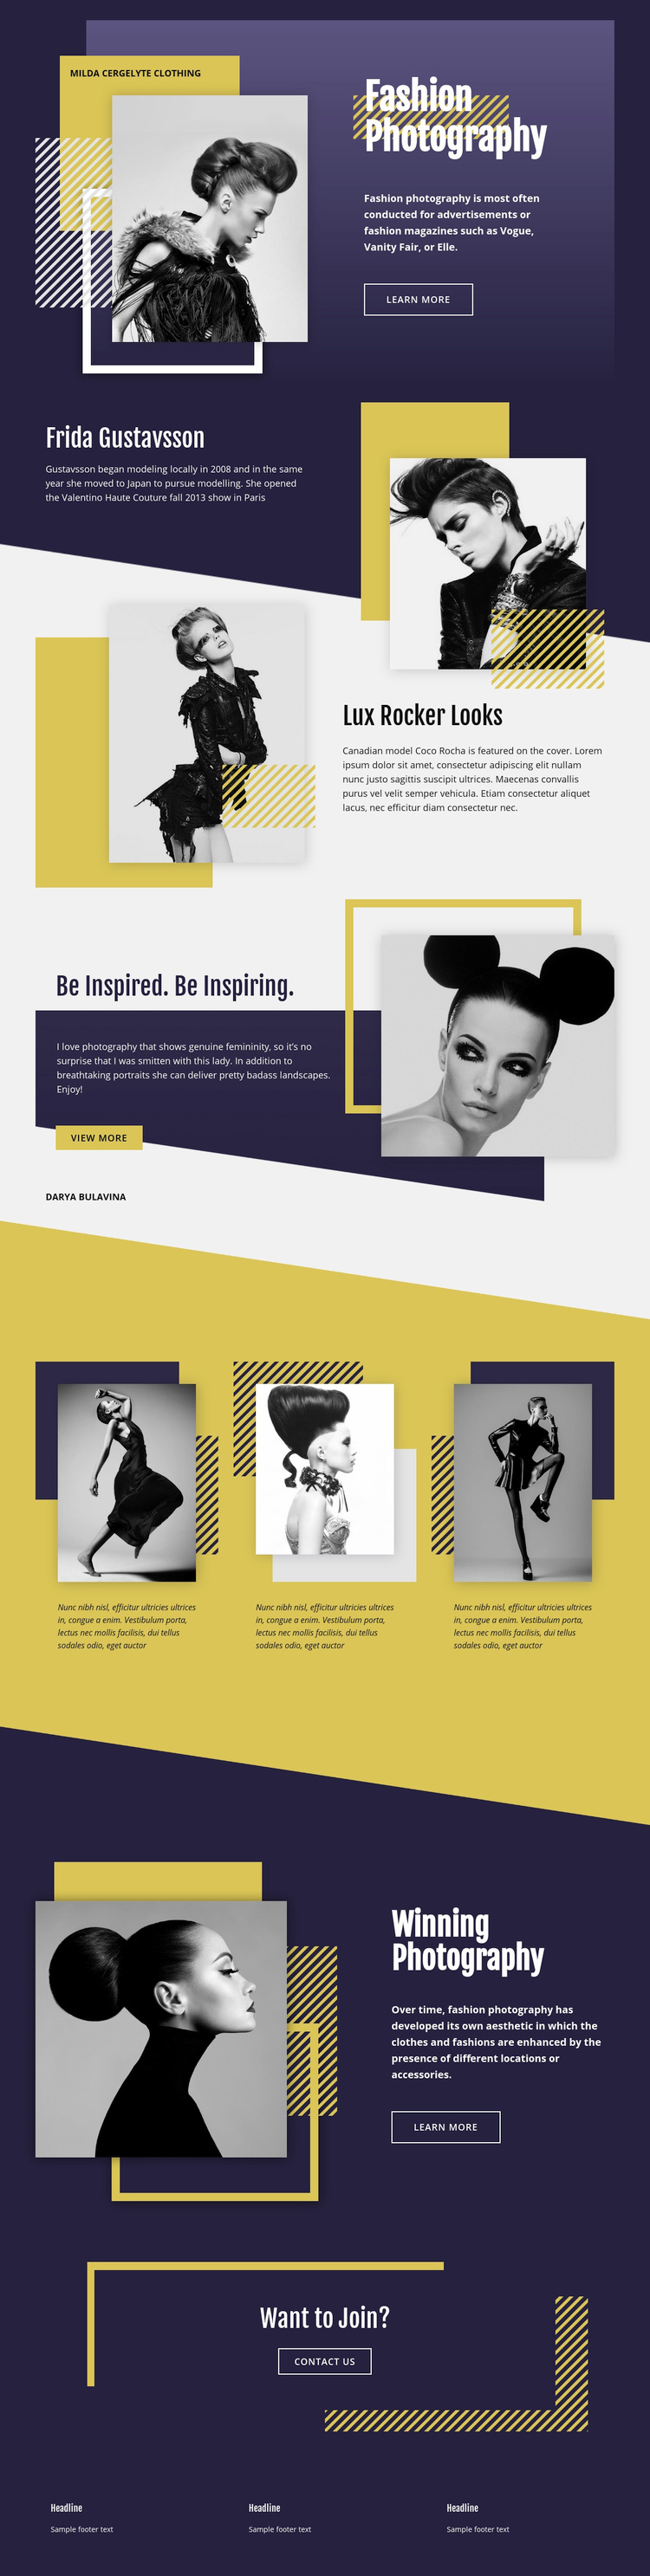 Fashion Photography Overlapping Wix Template Alternative